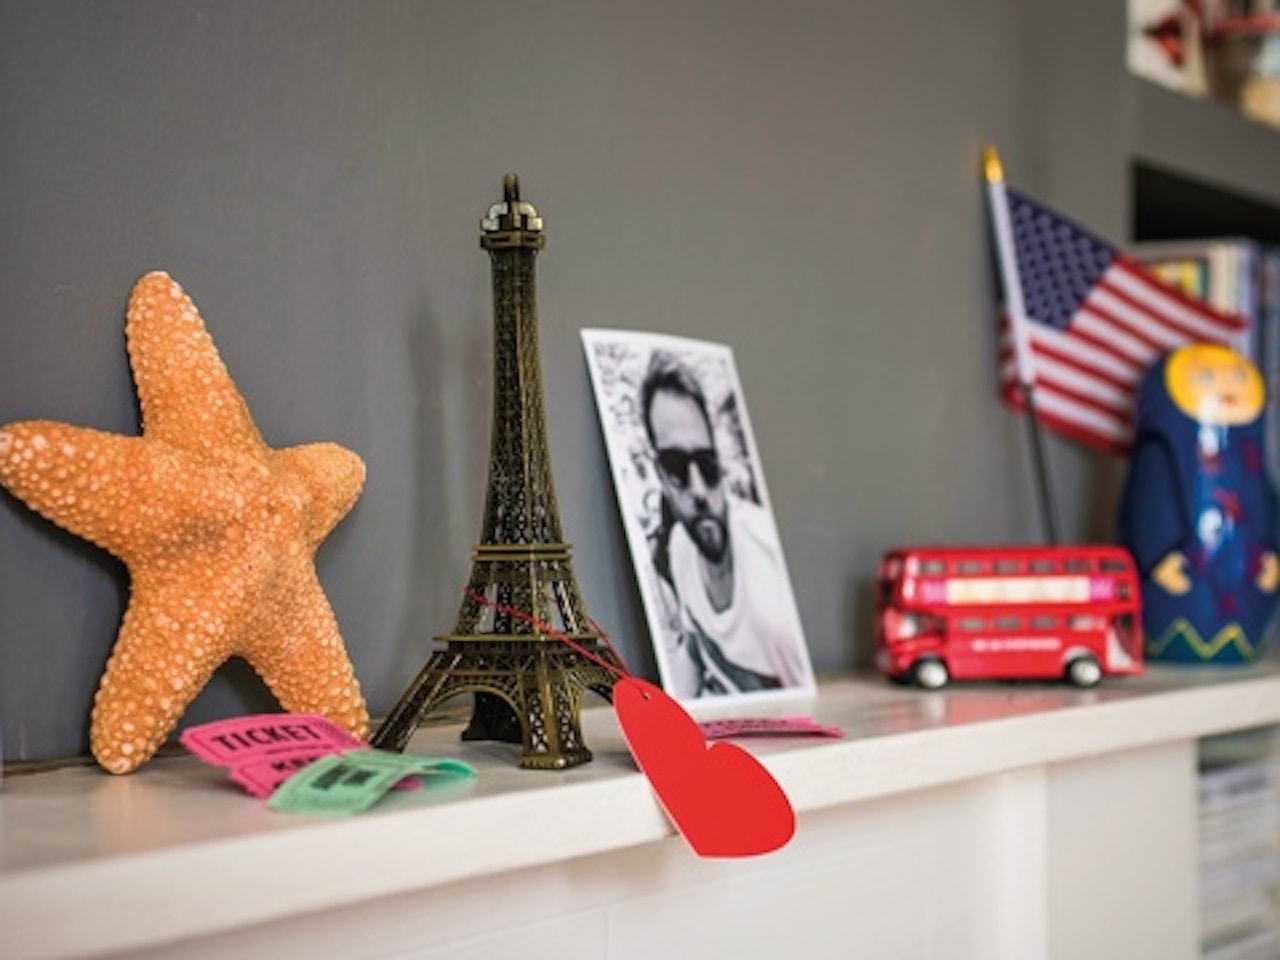 creative ways display travel souvenirs at home mantle trinkets